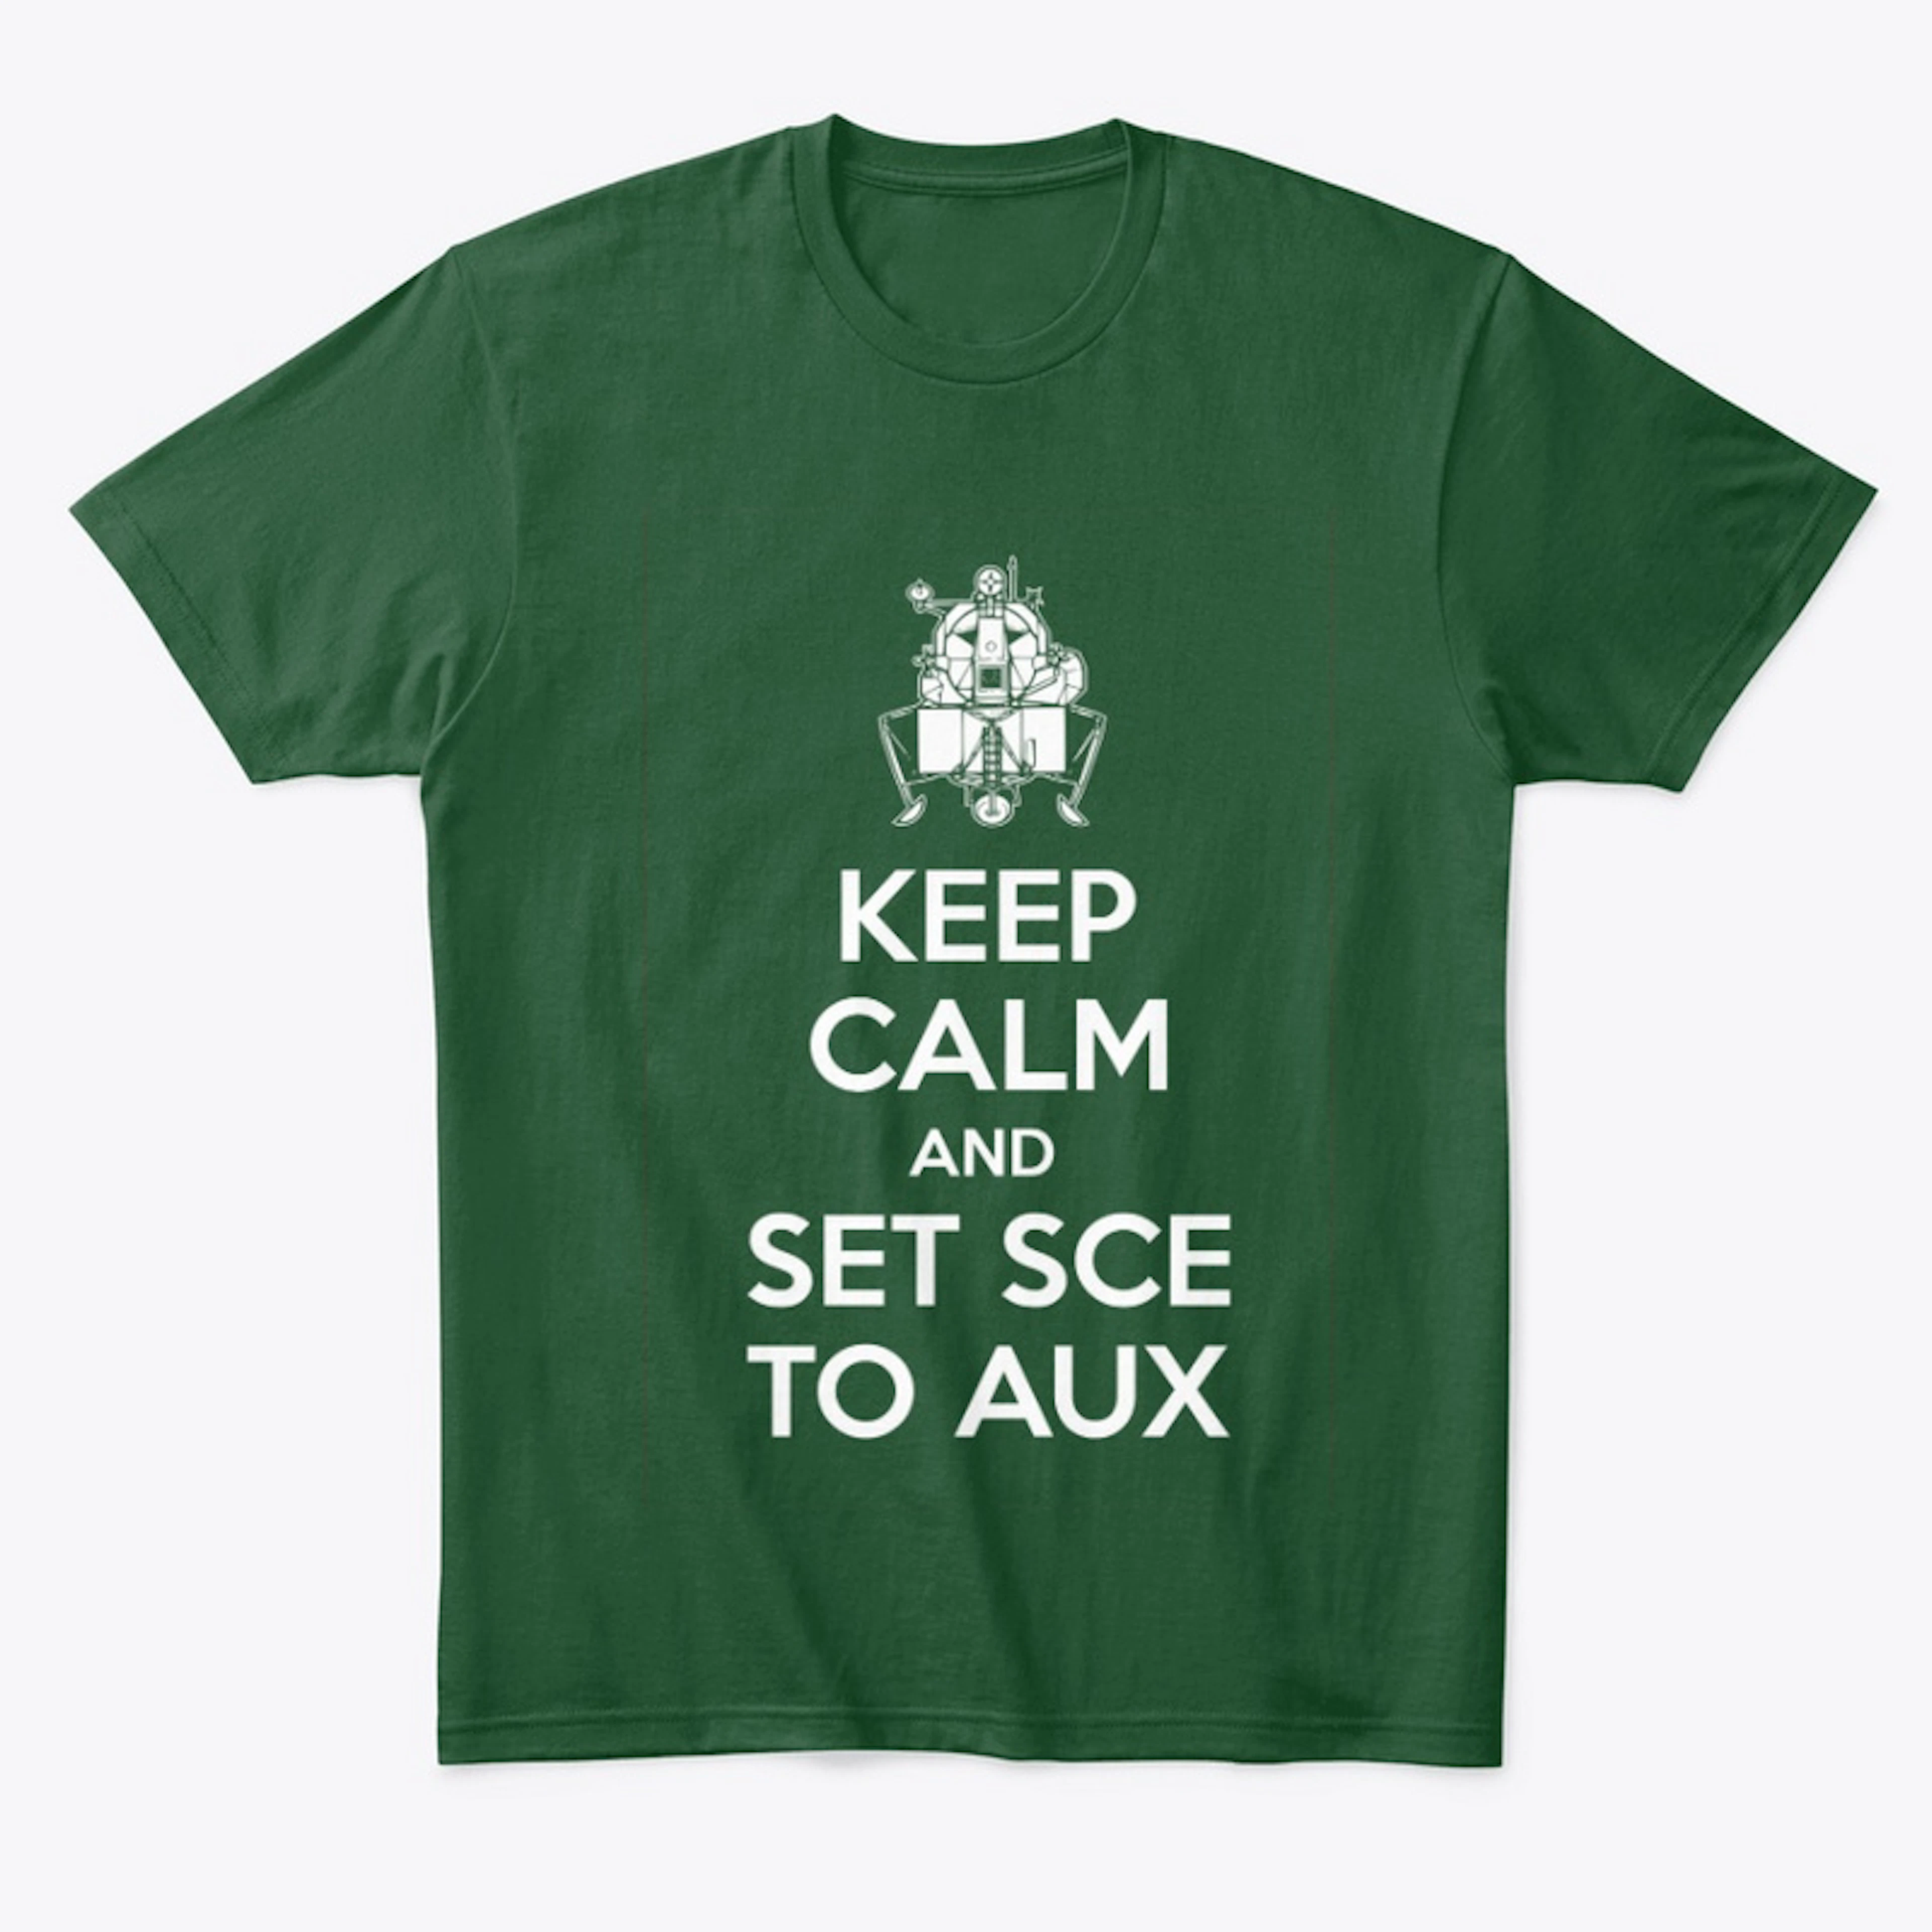 Keep Calm and Set SCE to AUX